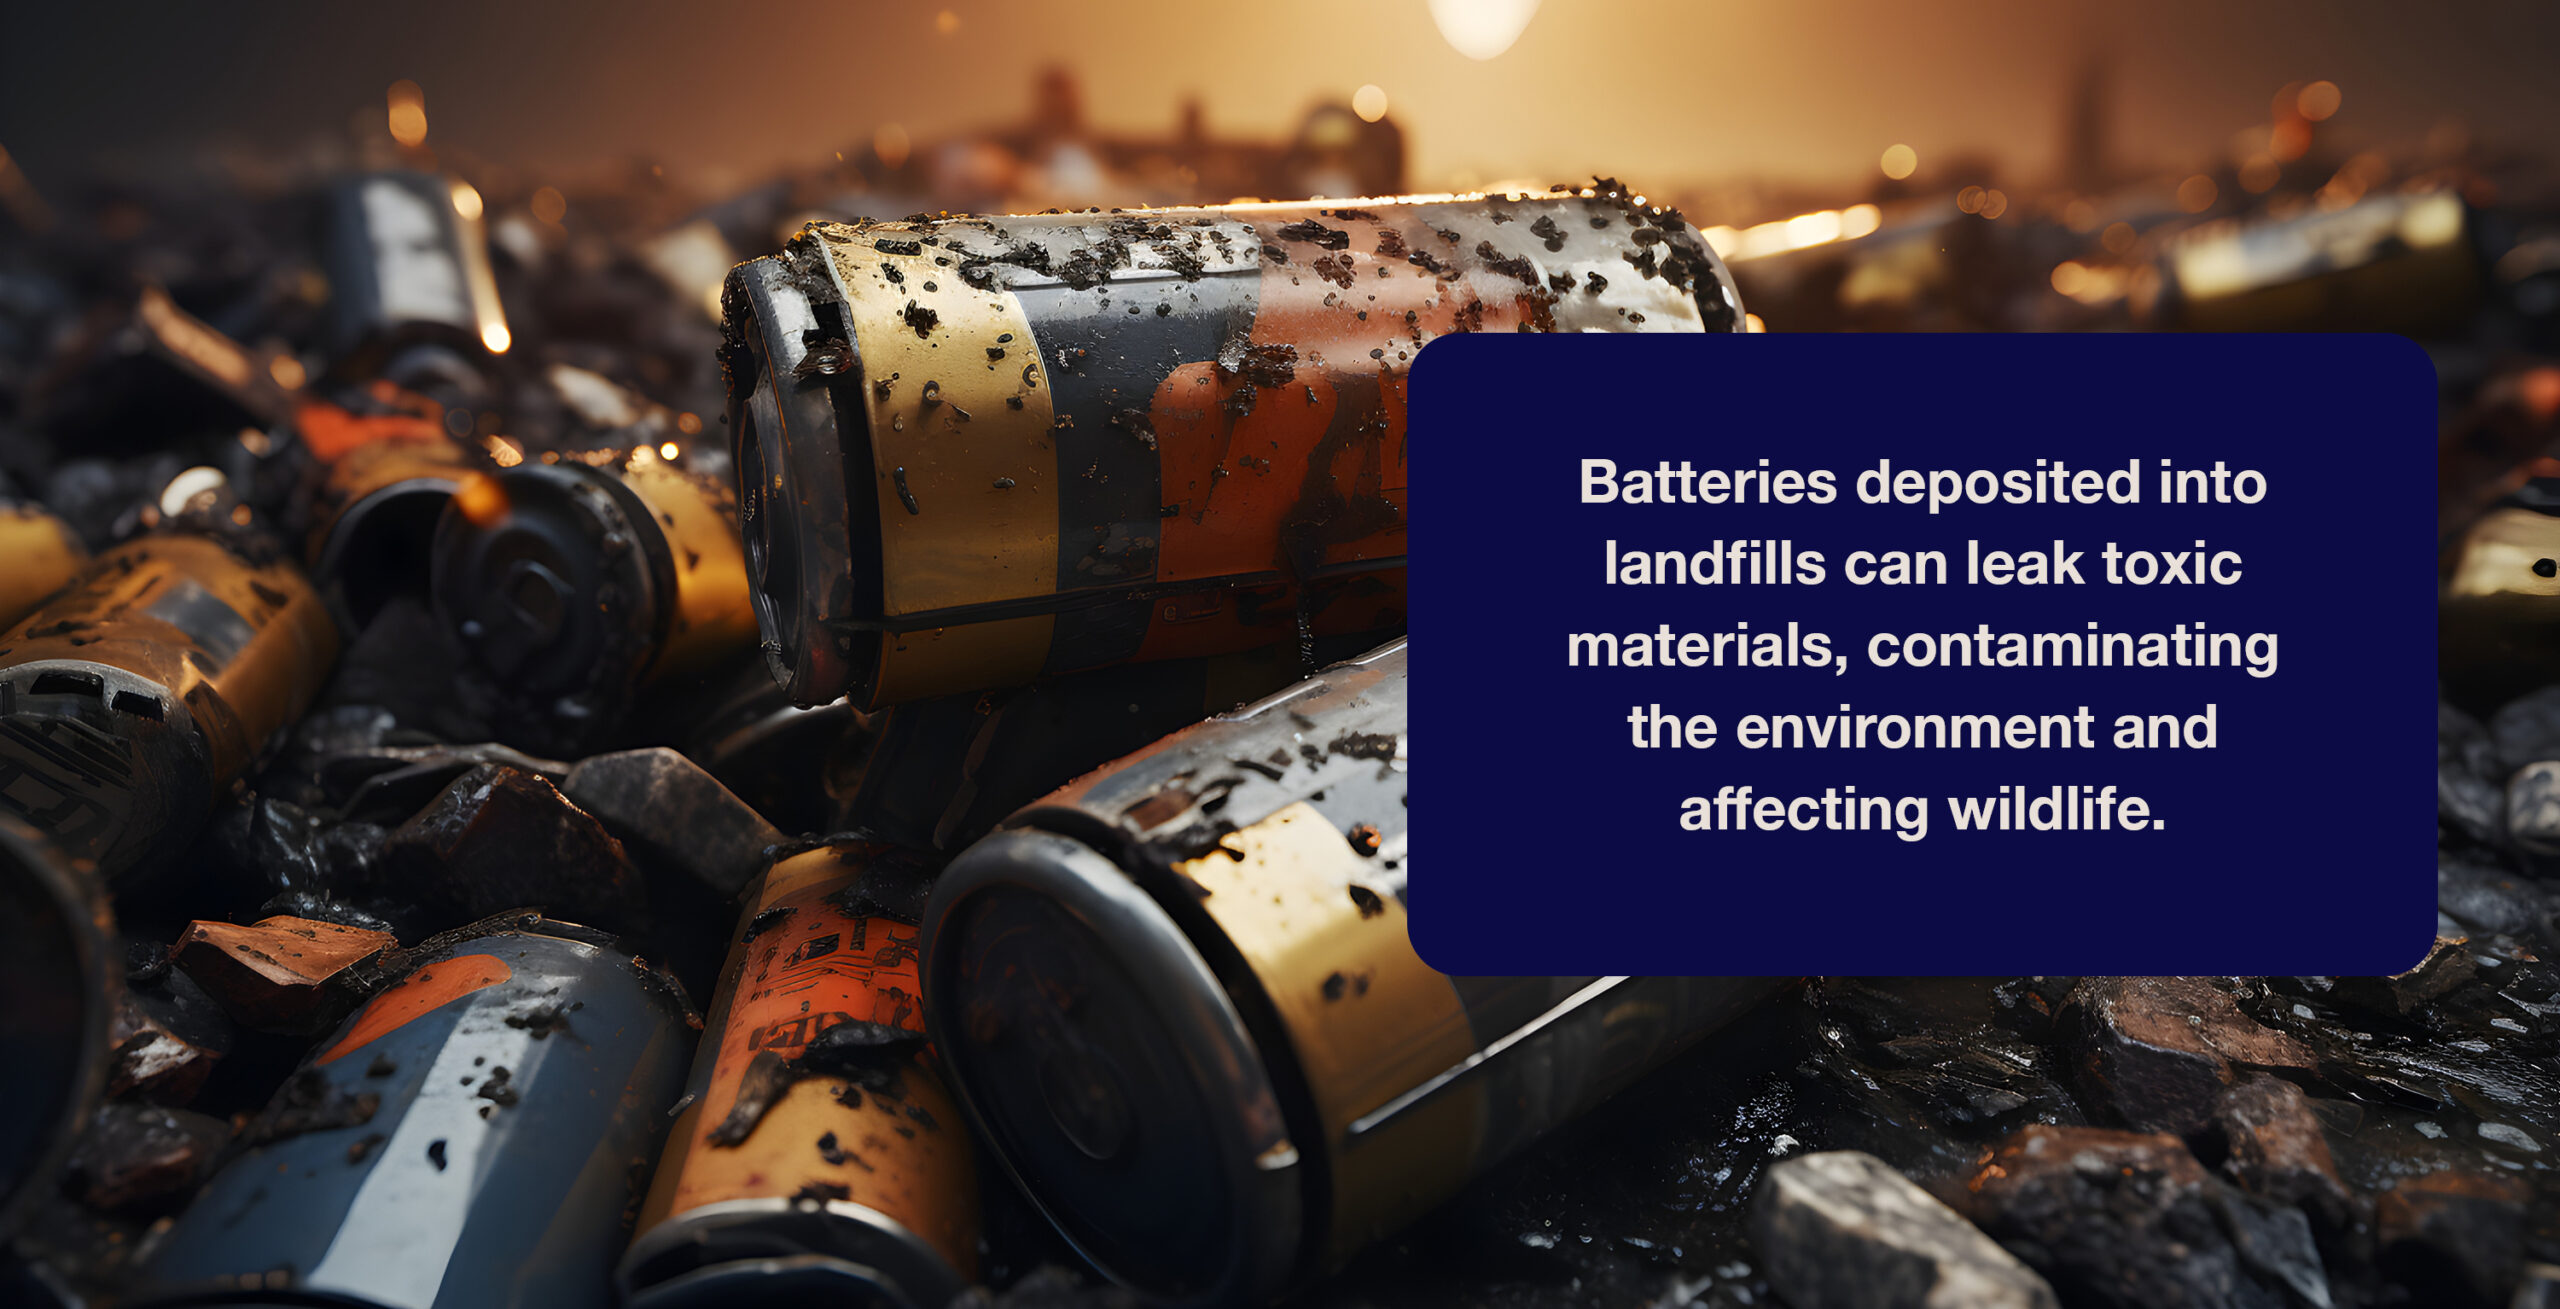 Batteries deposited into landfills can leak toxic materials, contaminating the environment and affecting wildlife.